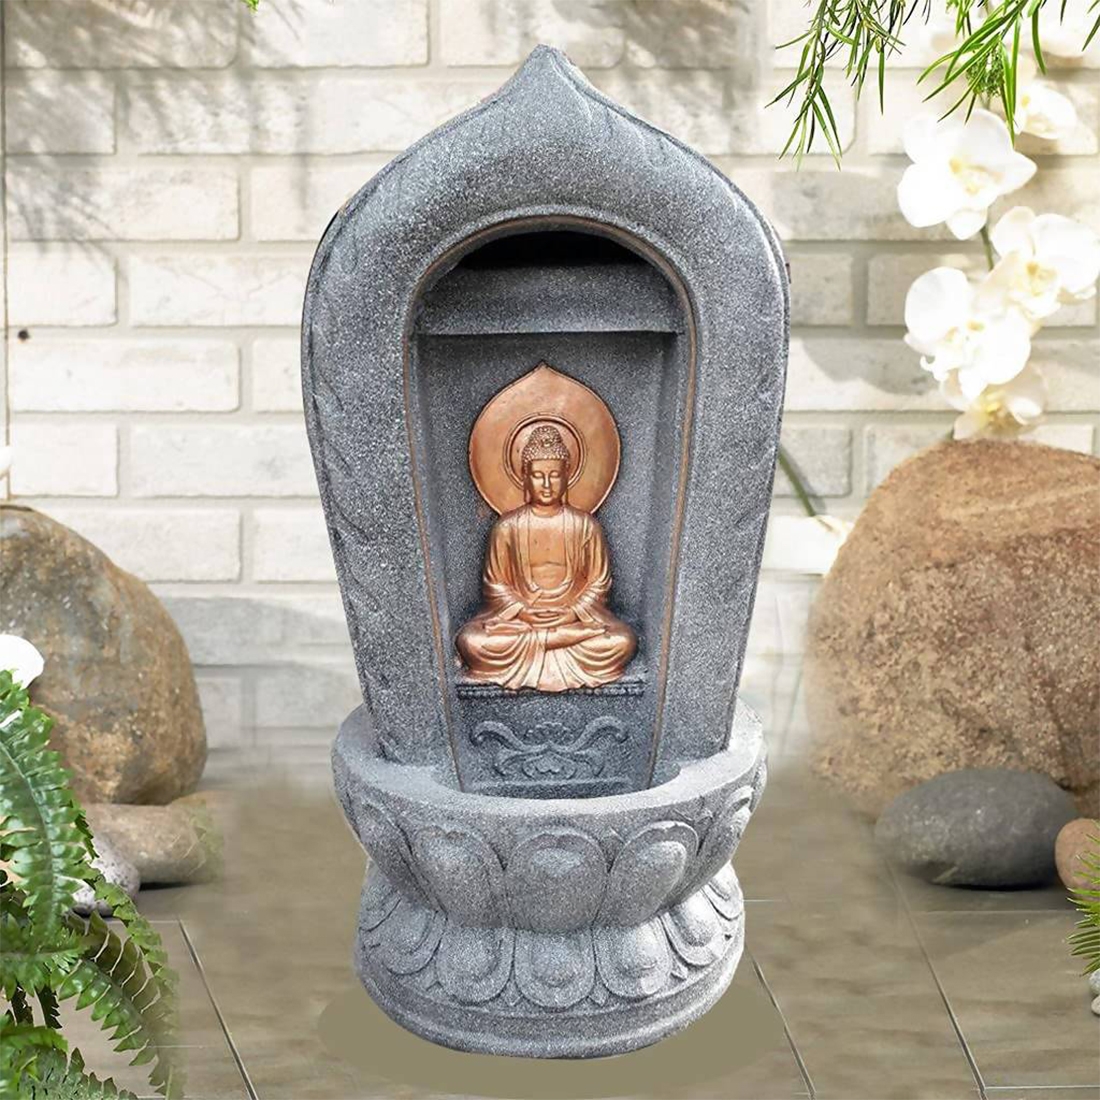 Order Happiness | Order Happiness Buddha Temple Water Fountain (37 x 37 x 94 cm)